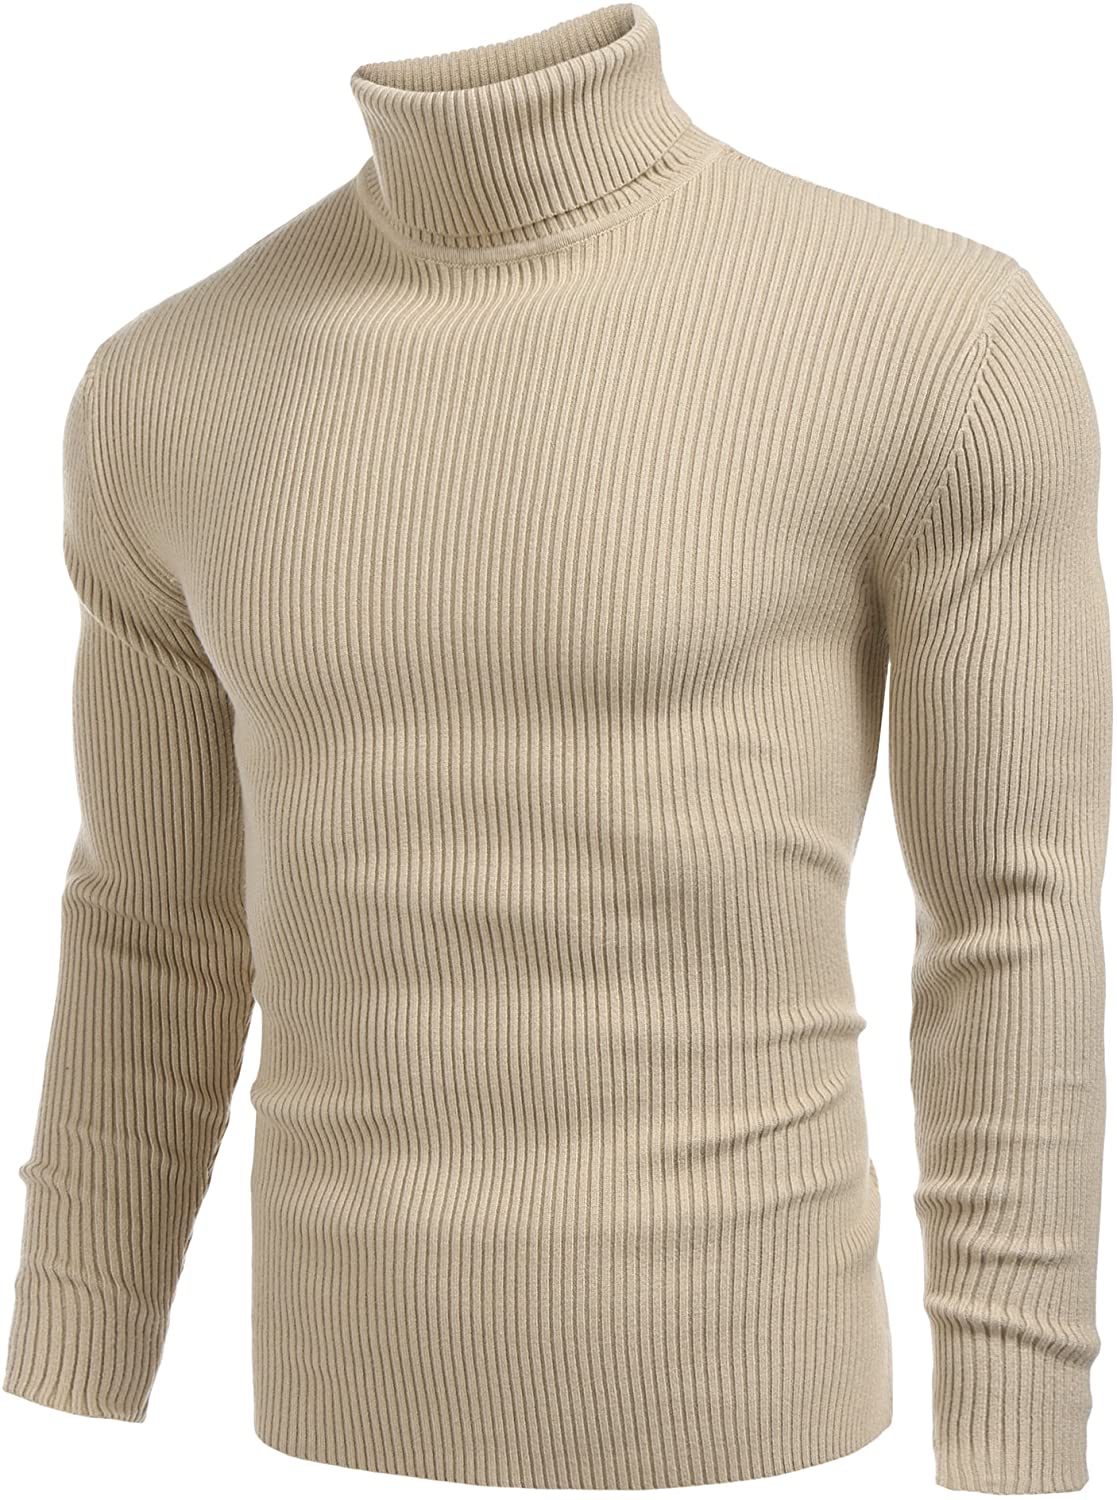 JINIDU Men's Thermal Ribbed Turtleneck Slim Fit Casual Knitted Pullover ...